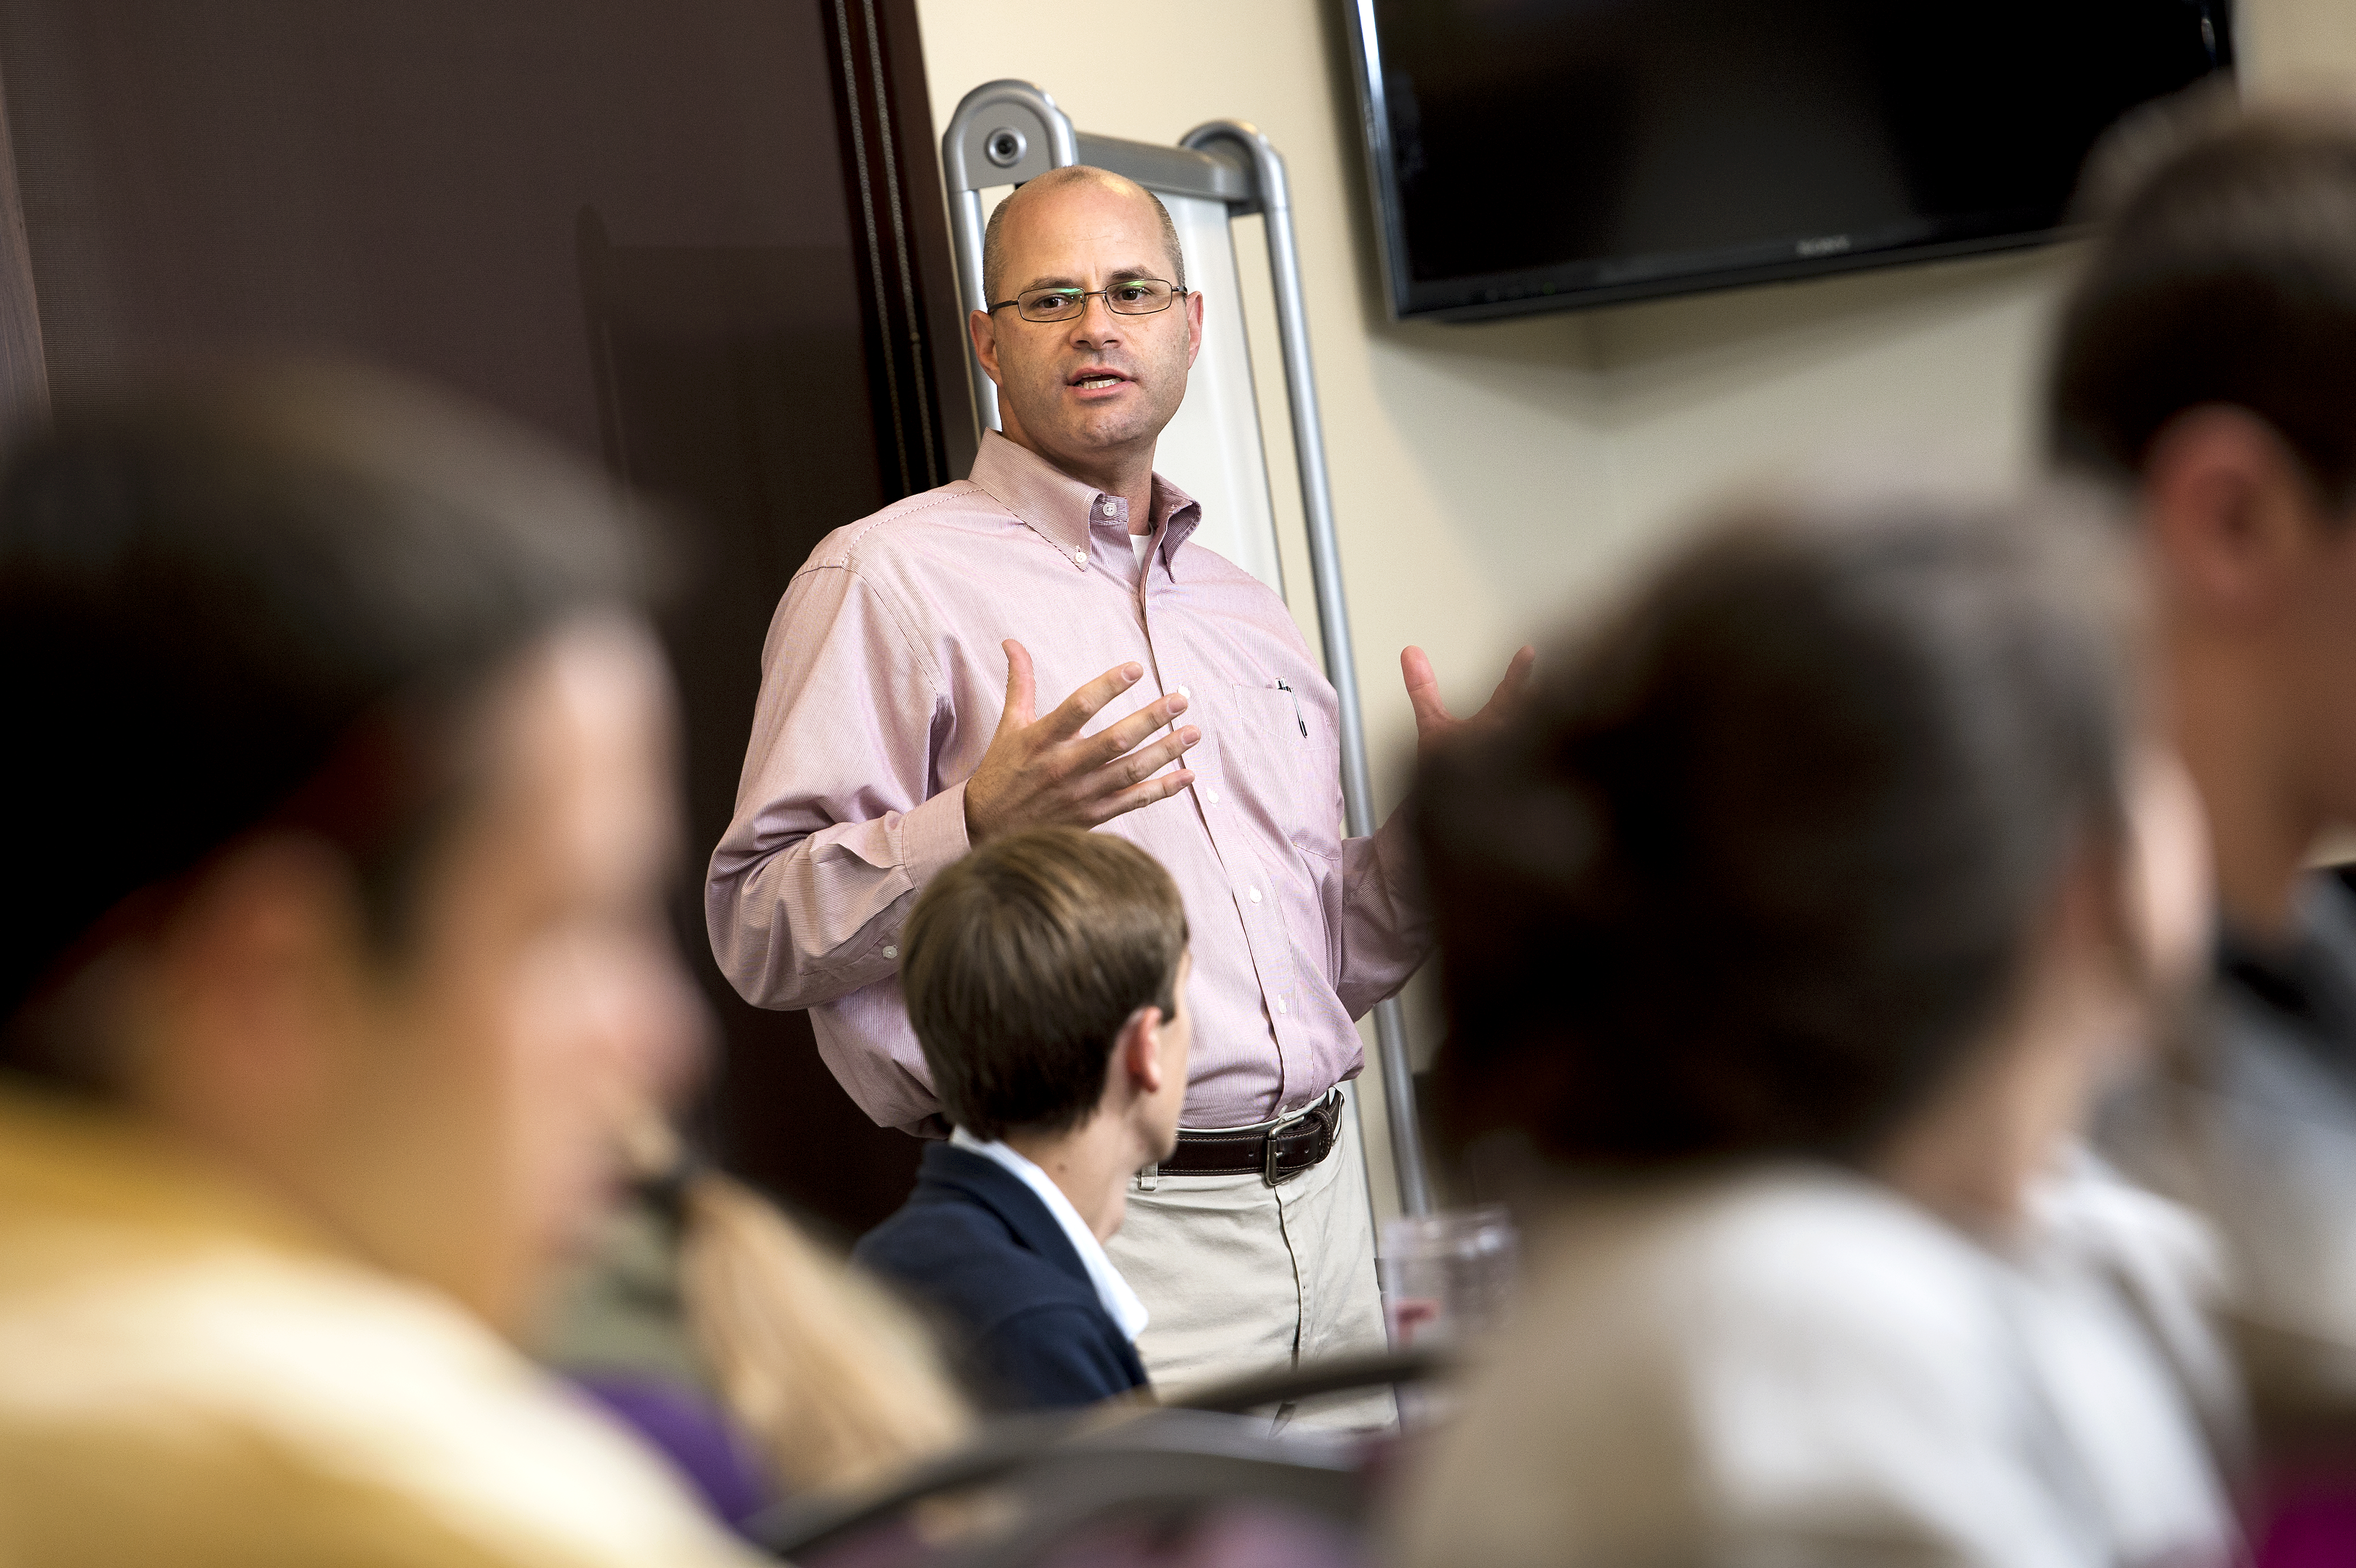 Marc Junkunc, who is faculty director of Virginia Tech’s Innovate program, seeks to impart some key lessons on entrepreneurship in his classes. 